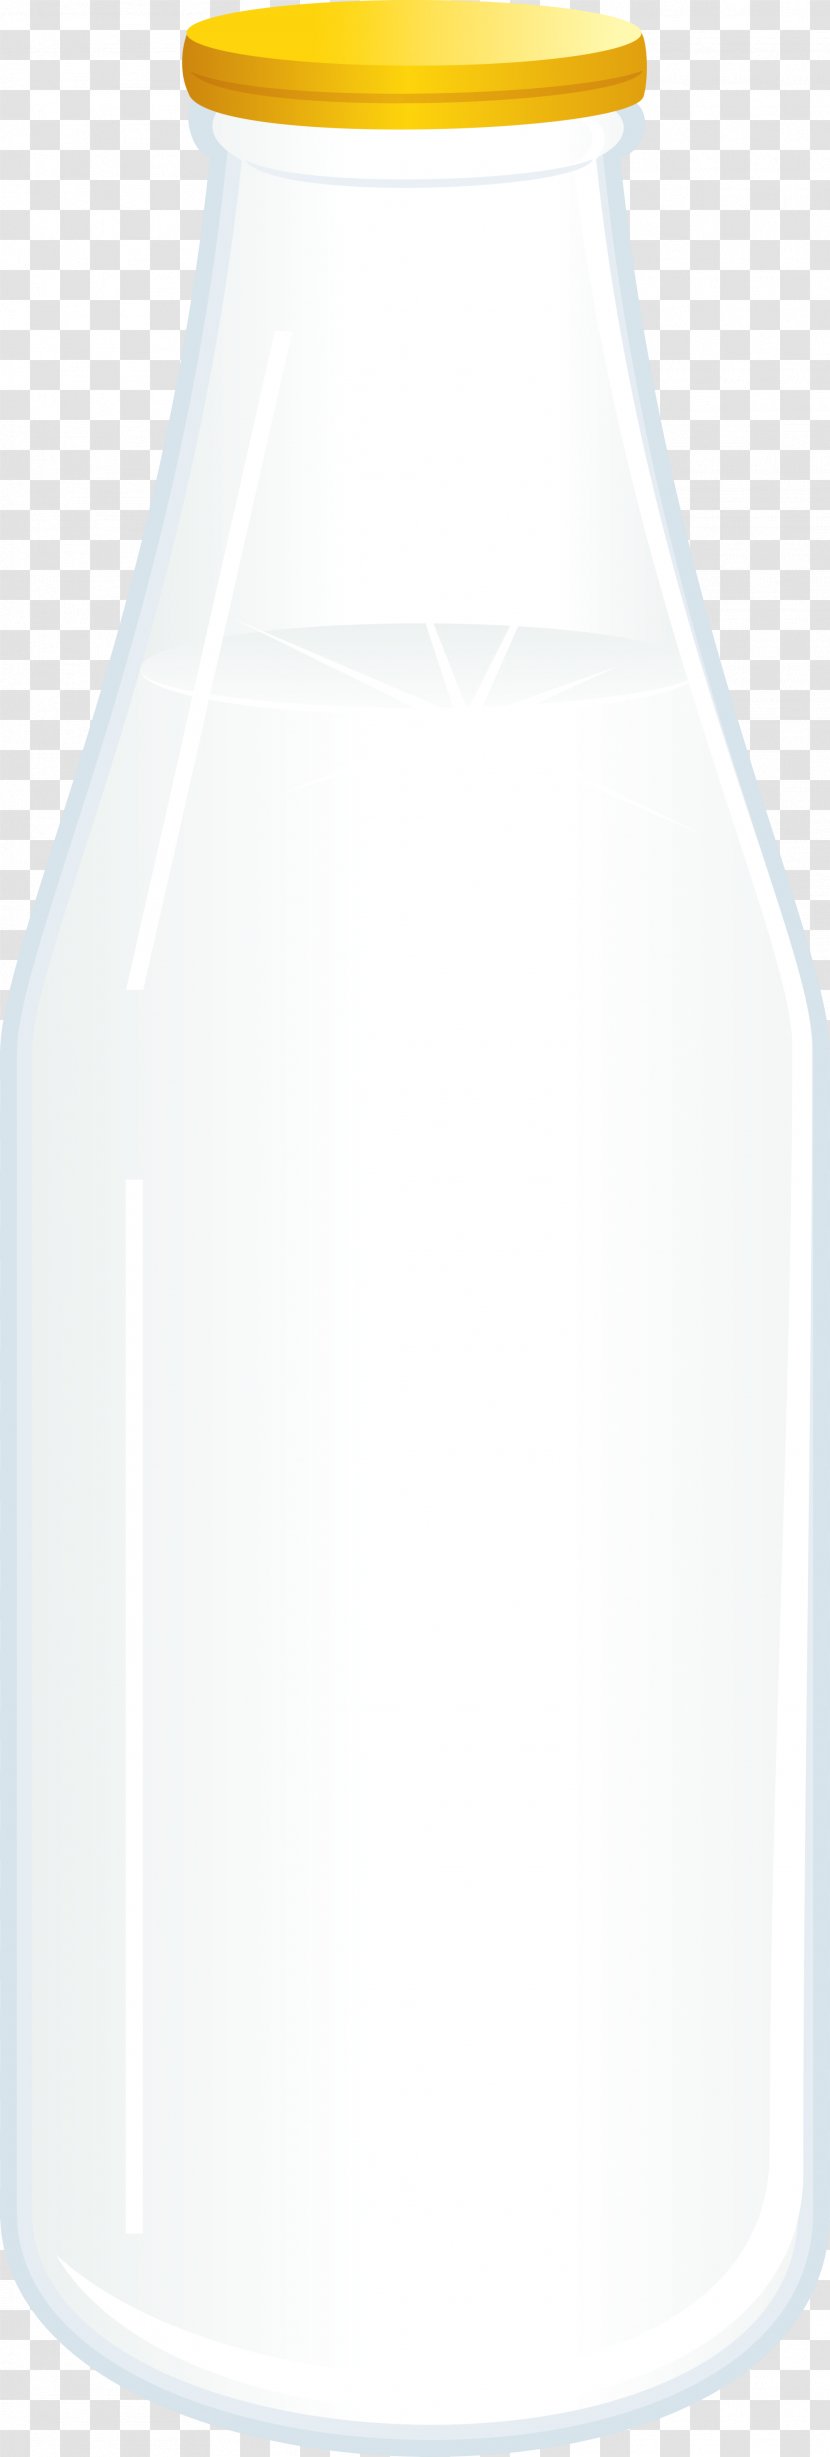 Glass Bottle - Yellow Transparent PNG